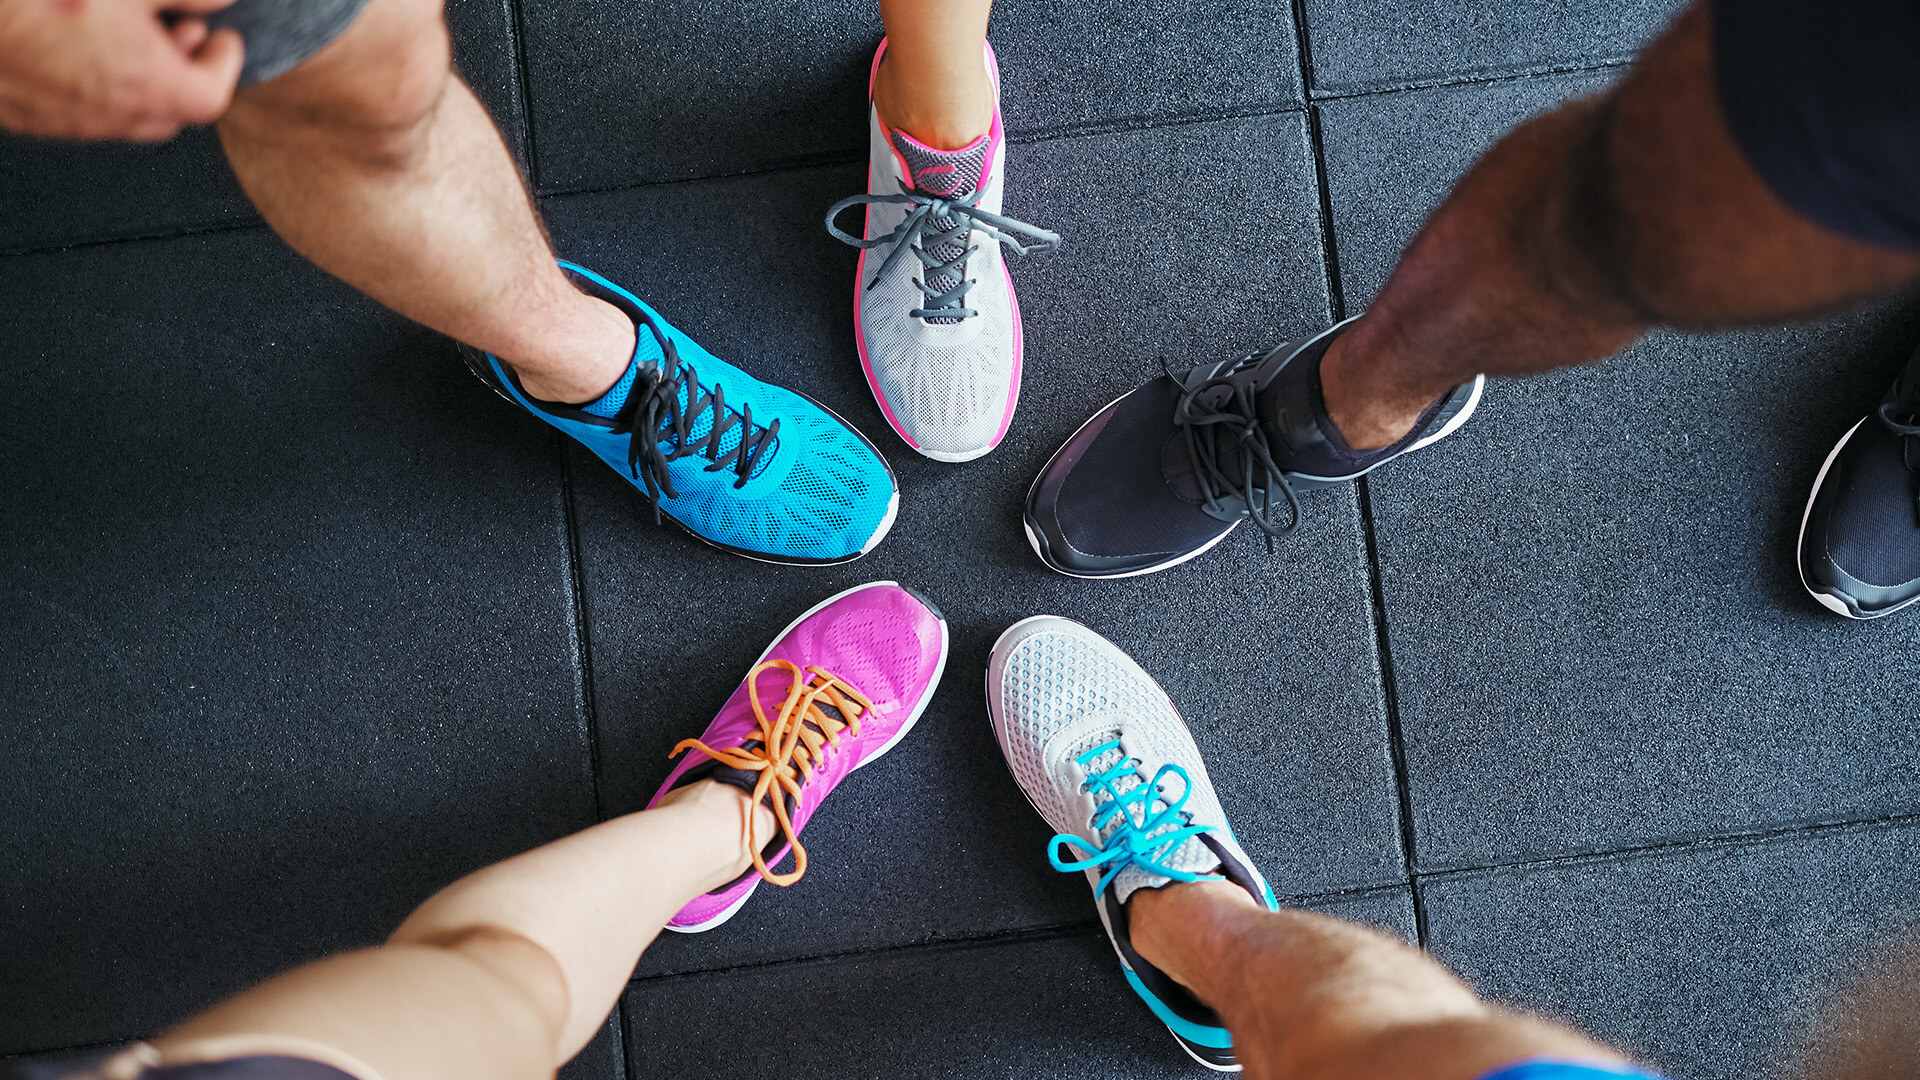 How to Choose Comfortable Yet Stylish Running Shoes